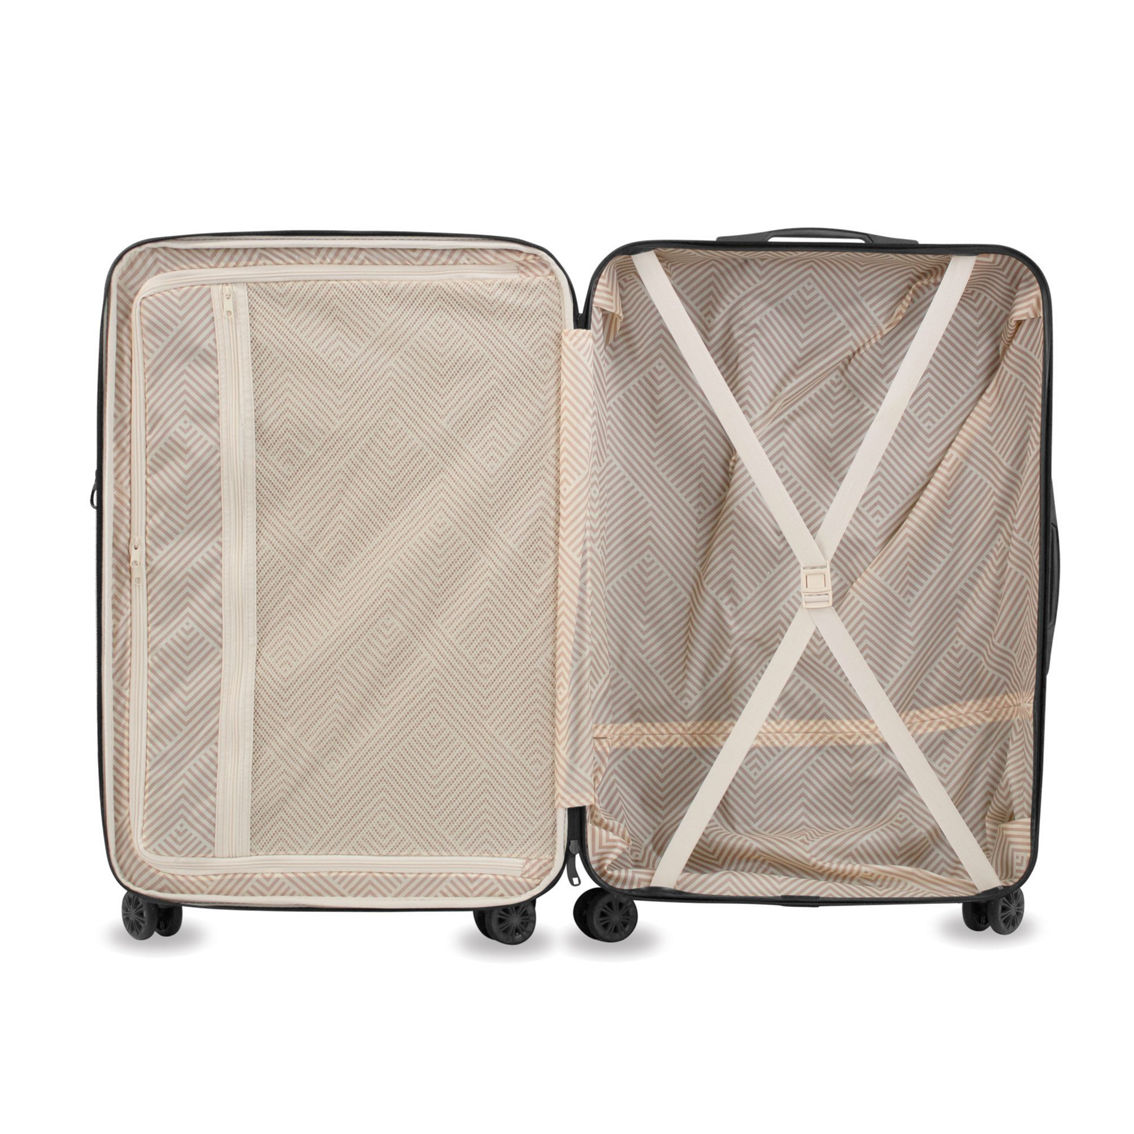 American Green Travel  Allegro Expandable 3Piece Luggage Set - Image 5 of 5